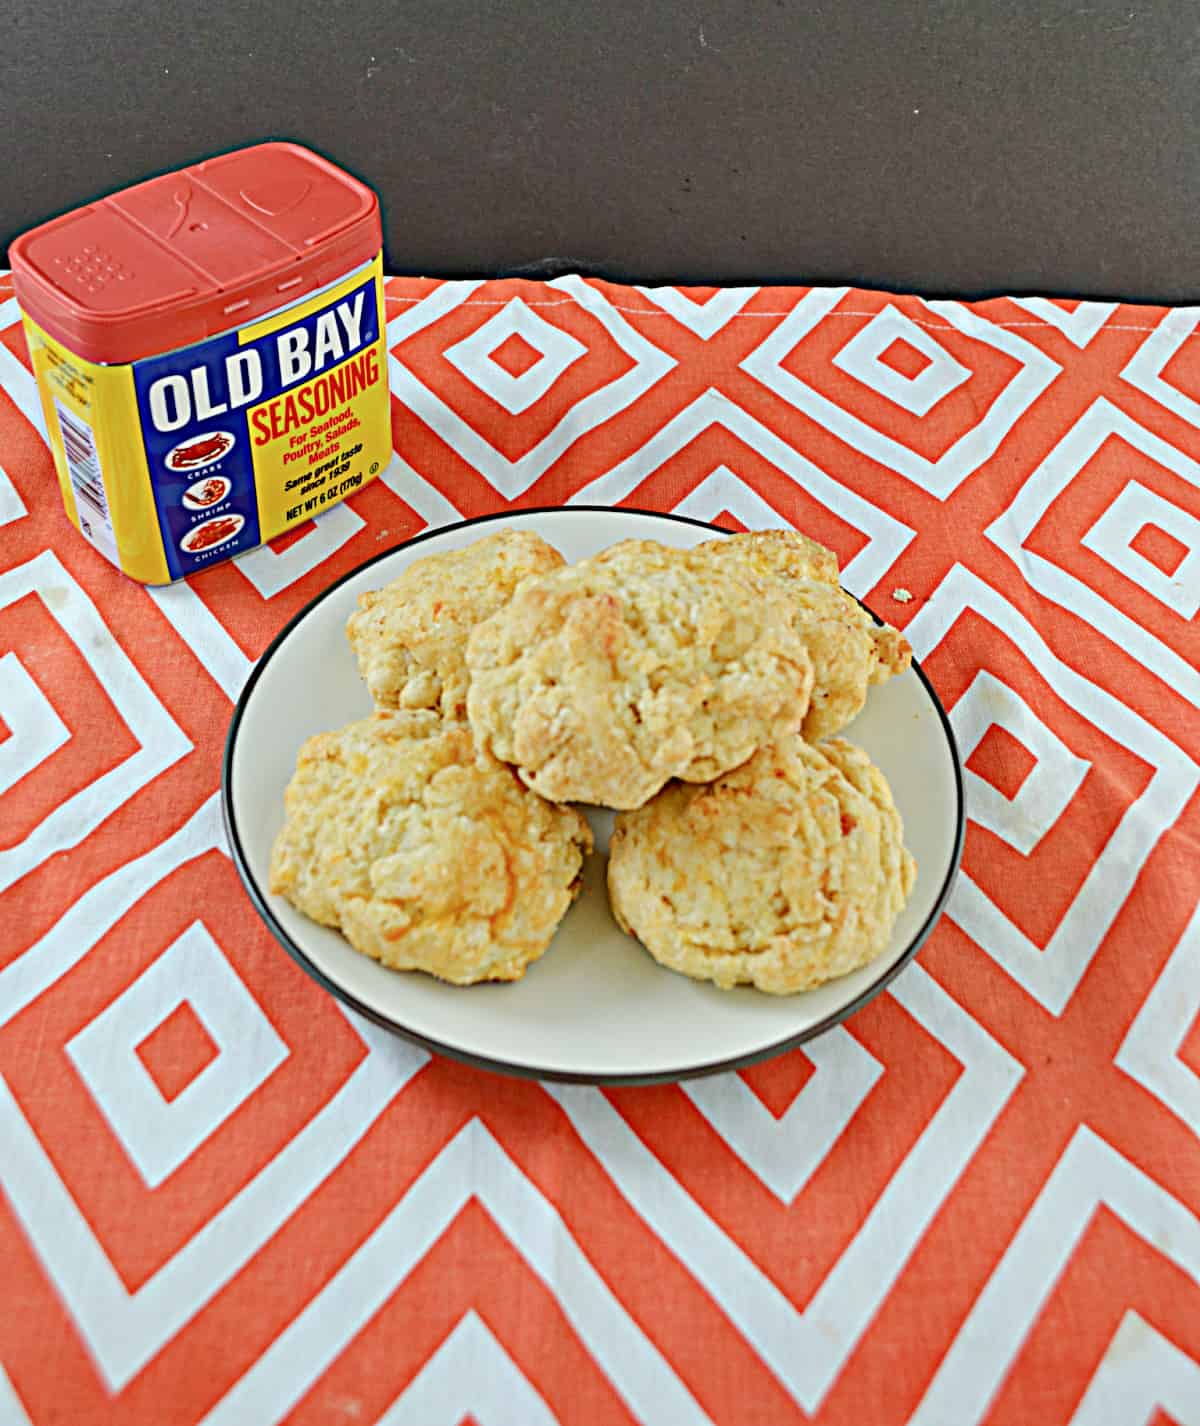 A plate of biscuits with a can of Old Bay seasoning.